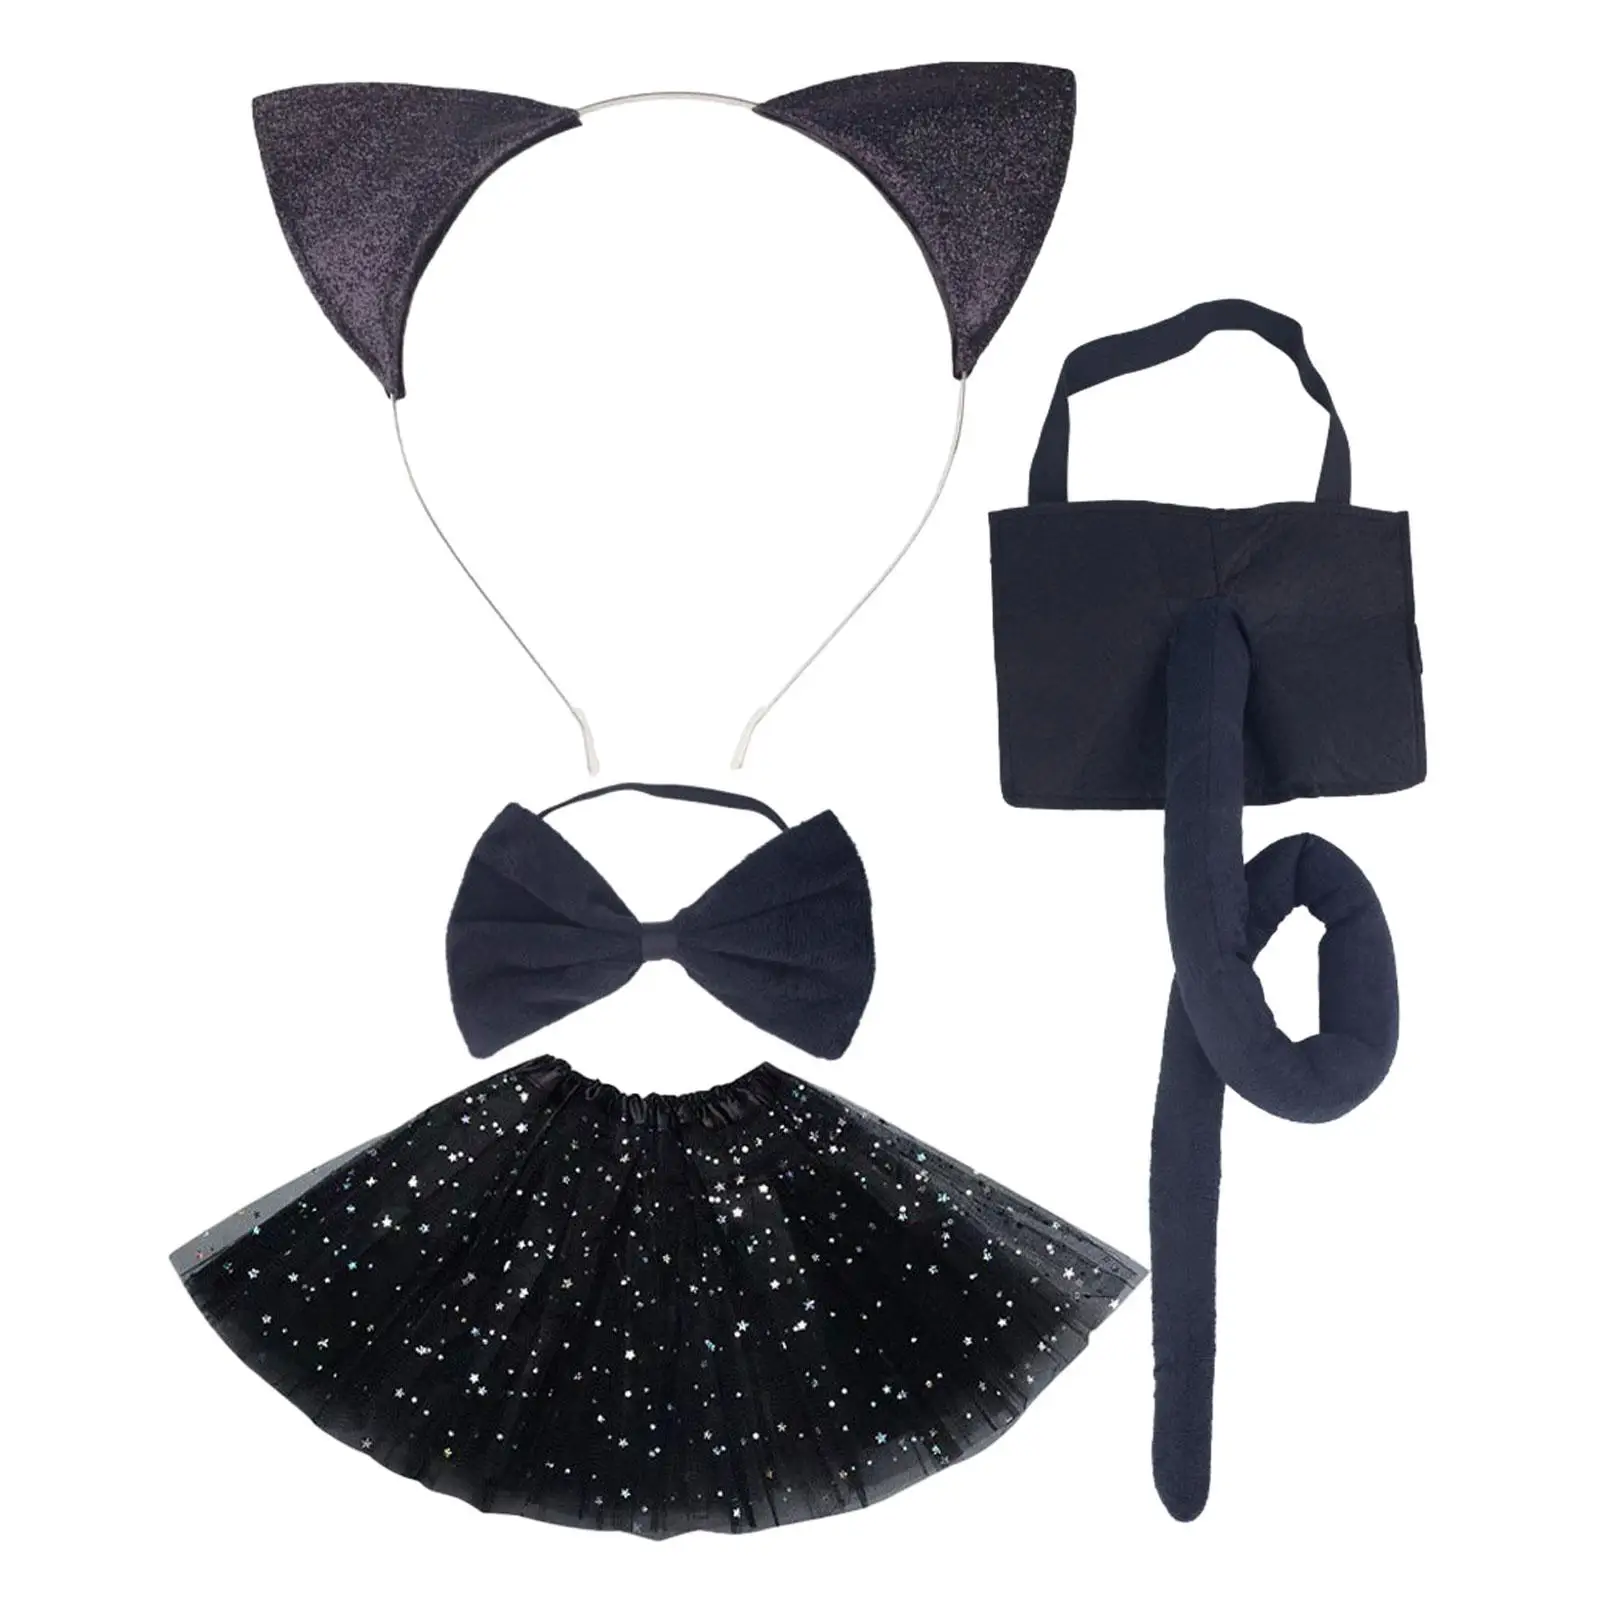 Kids , Bow Tie and Tail Set Cosplay Decorative Creative Animal Costume Accessories for Children Dress up Themed Party